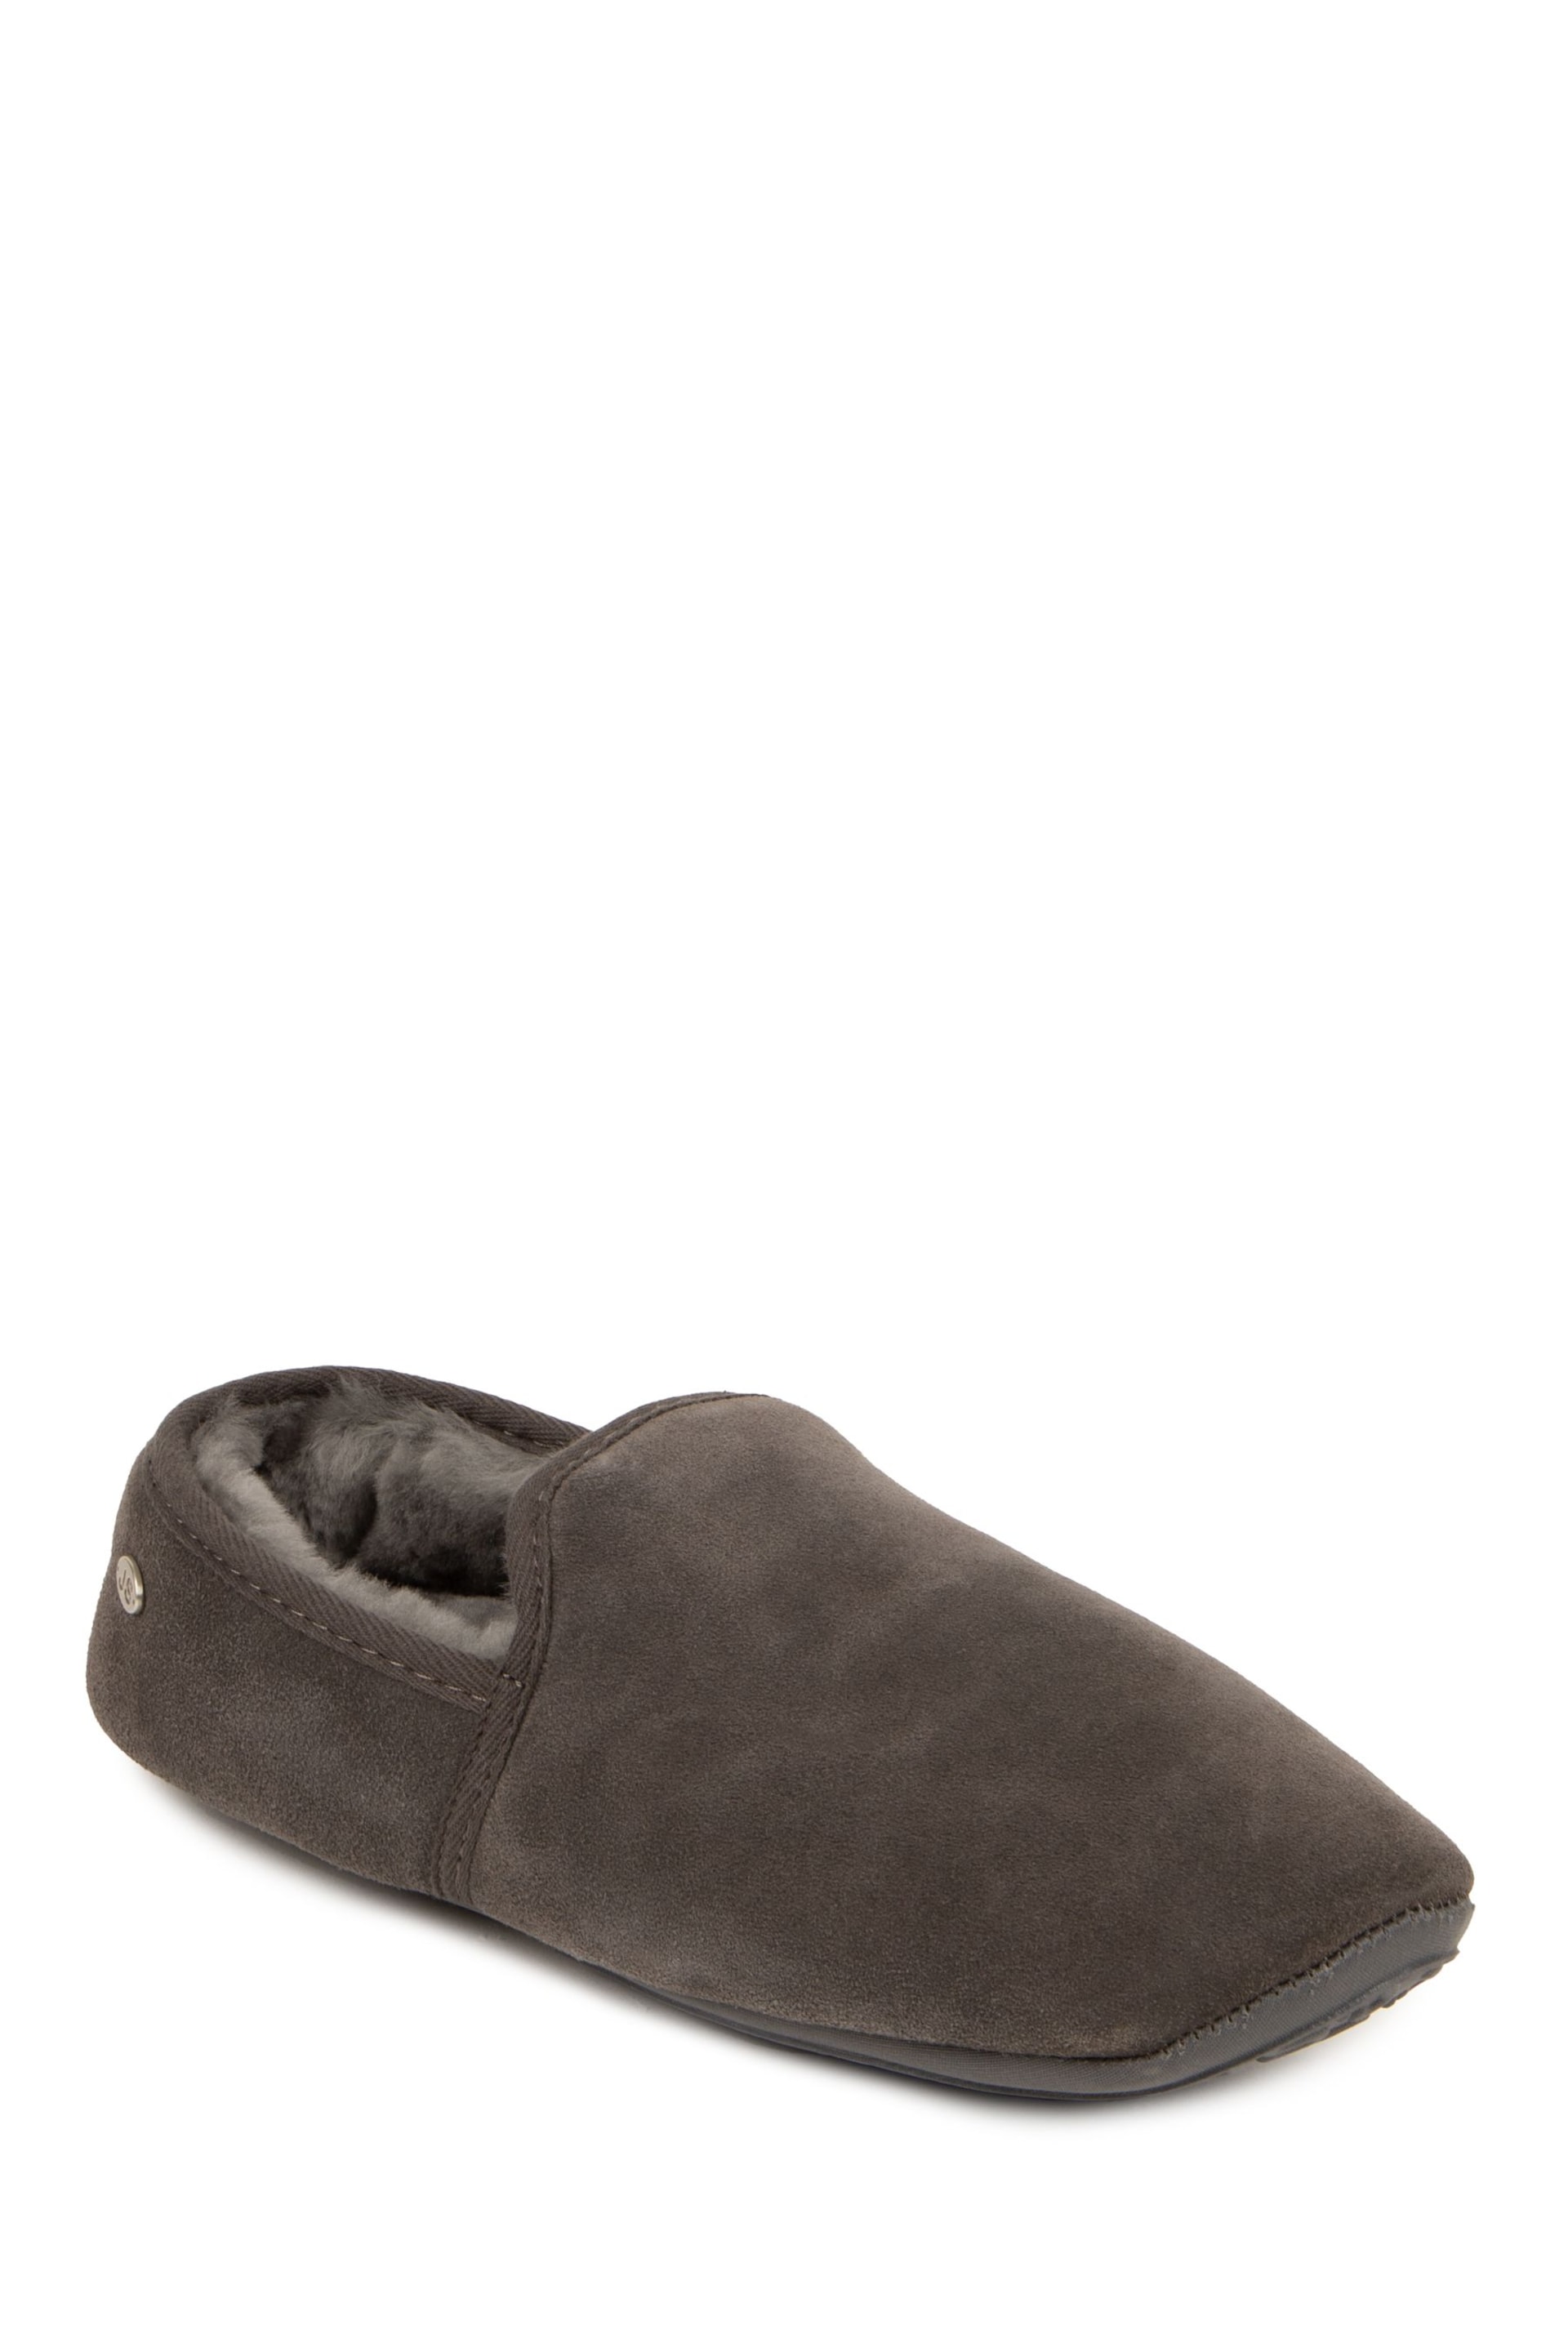 Just Sheepskin Grey Mens Chester Slippers - Image 3 of 5